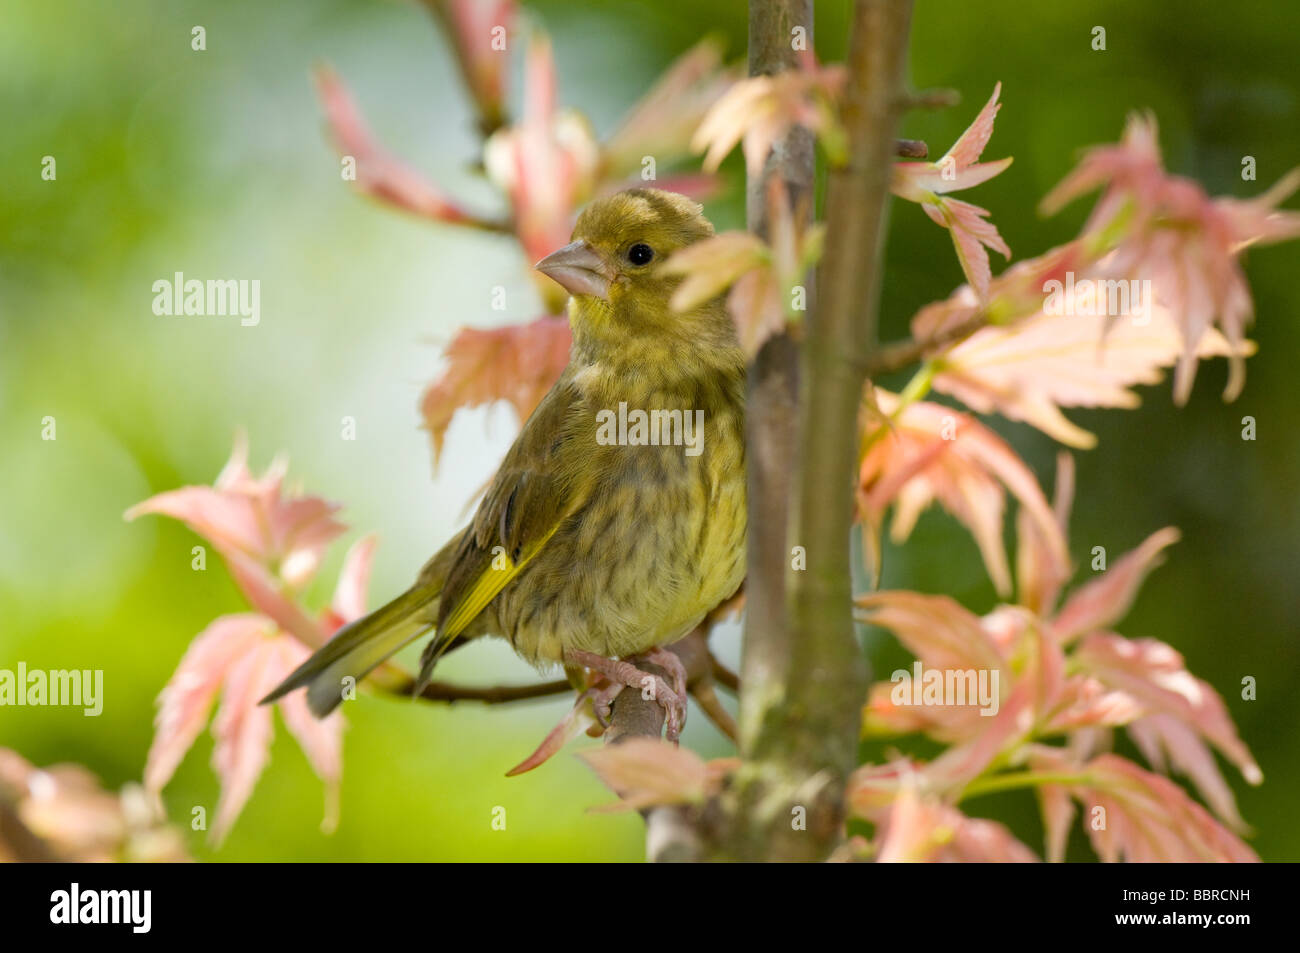 Greenfinch, Carduelis chloris, young juvenile or fledgeling perched in a Japanese Maple tree in a garden in spring. Stock Photo